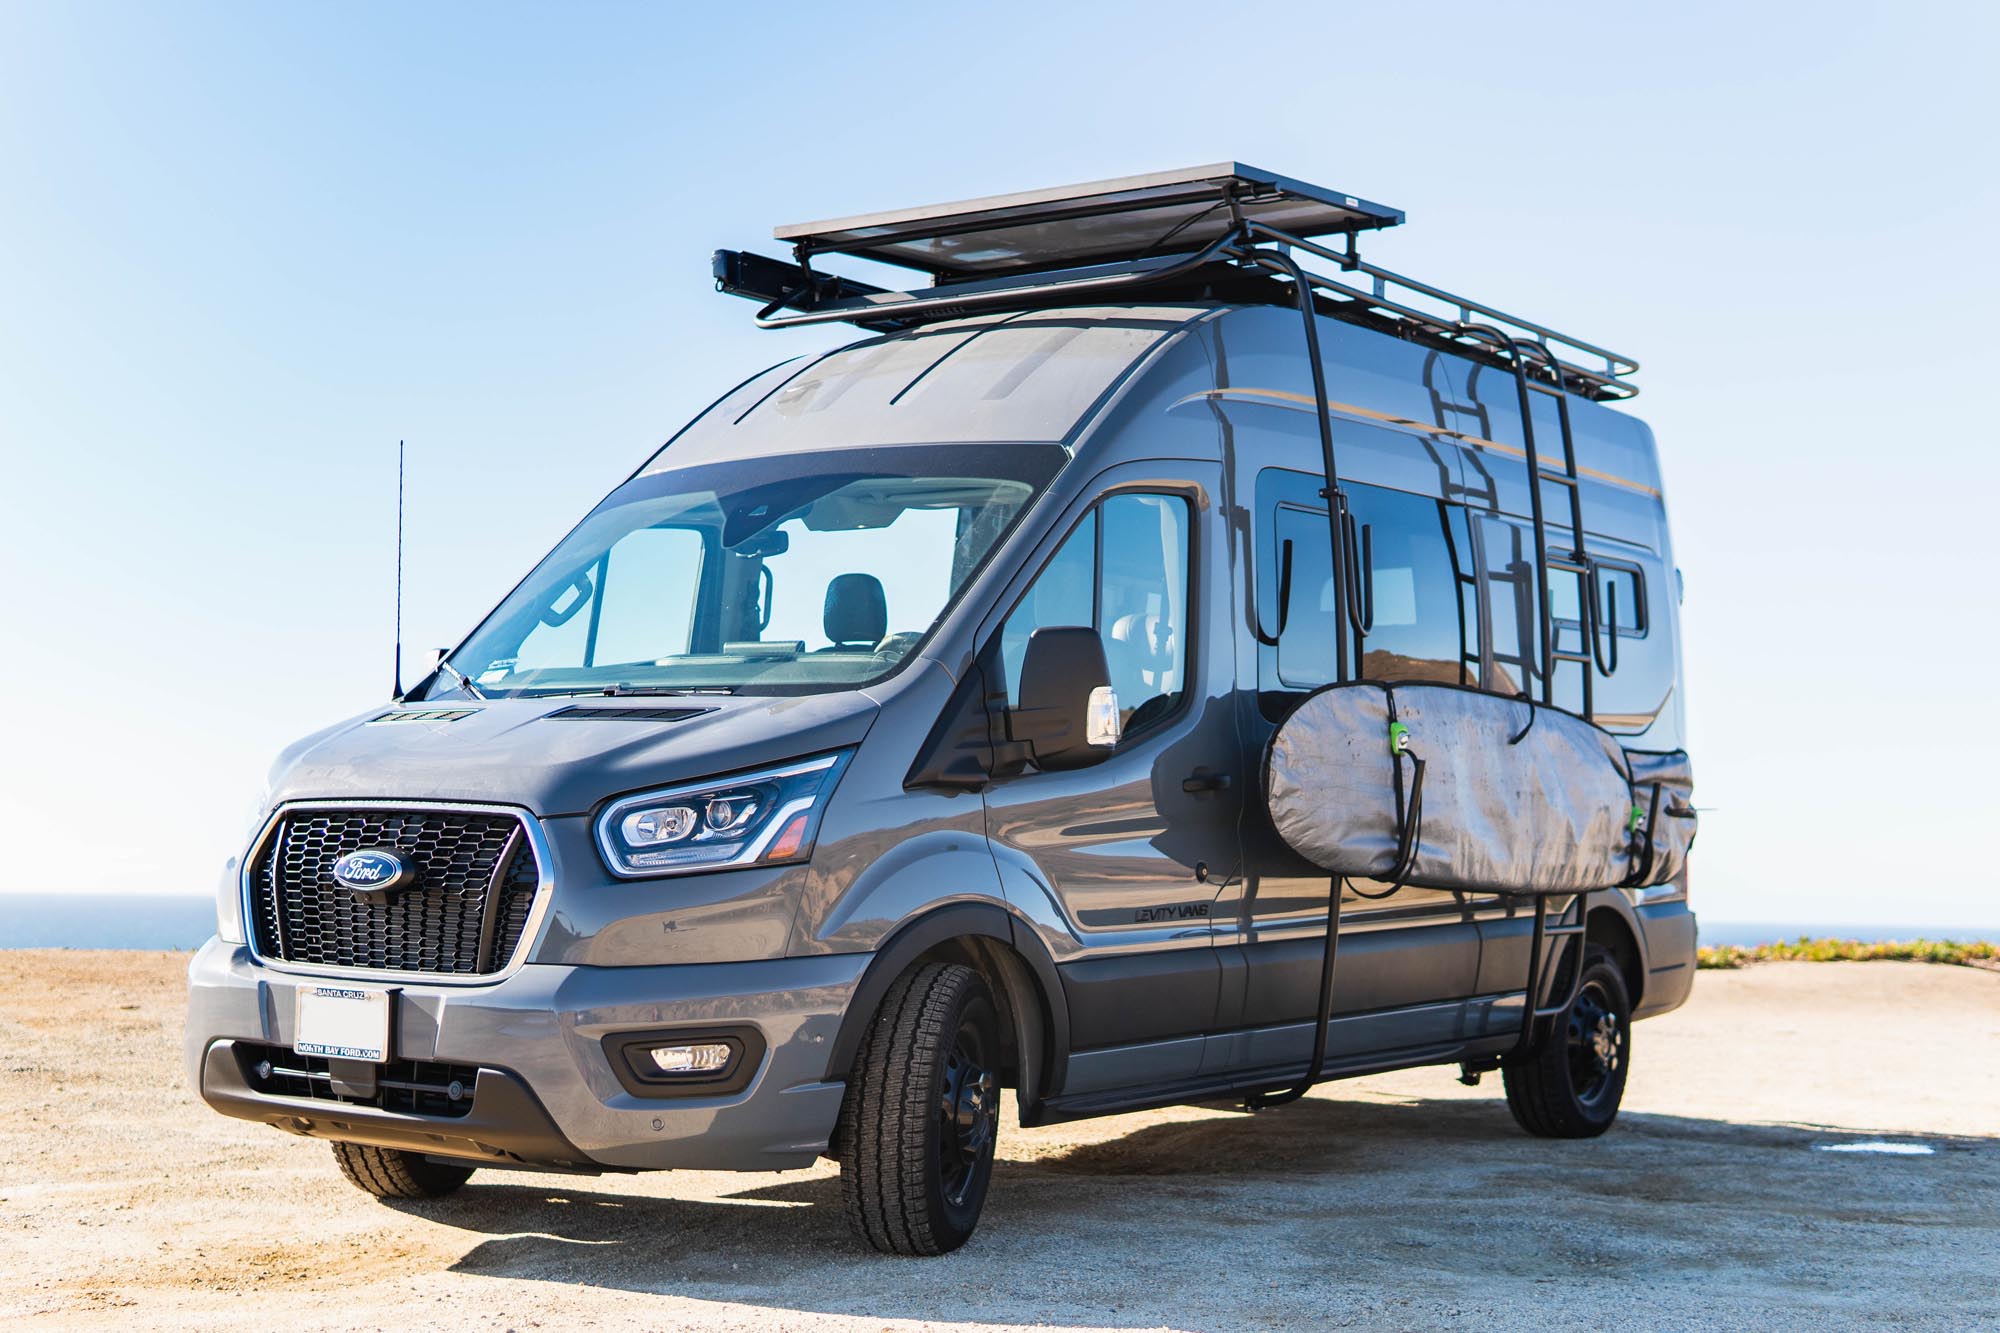 ford transit van conversion with external surfboard rack, roof rack, and solar panel parked on a beach near the ocean